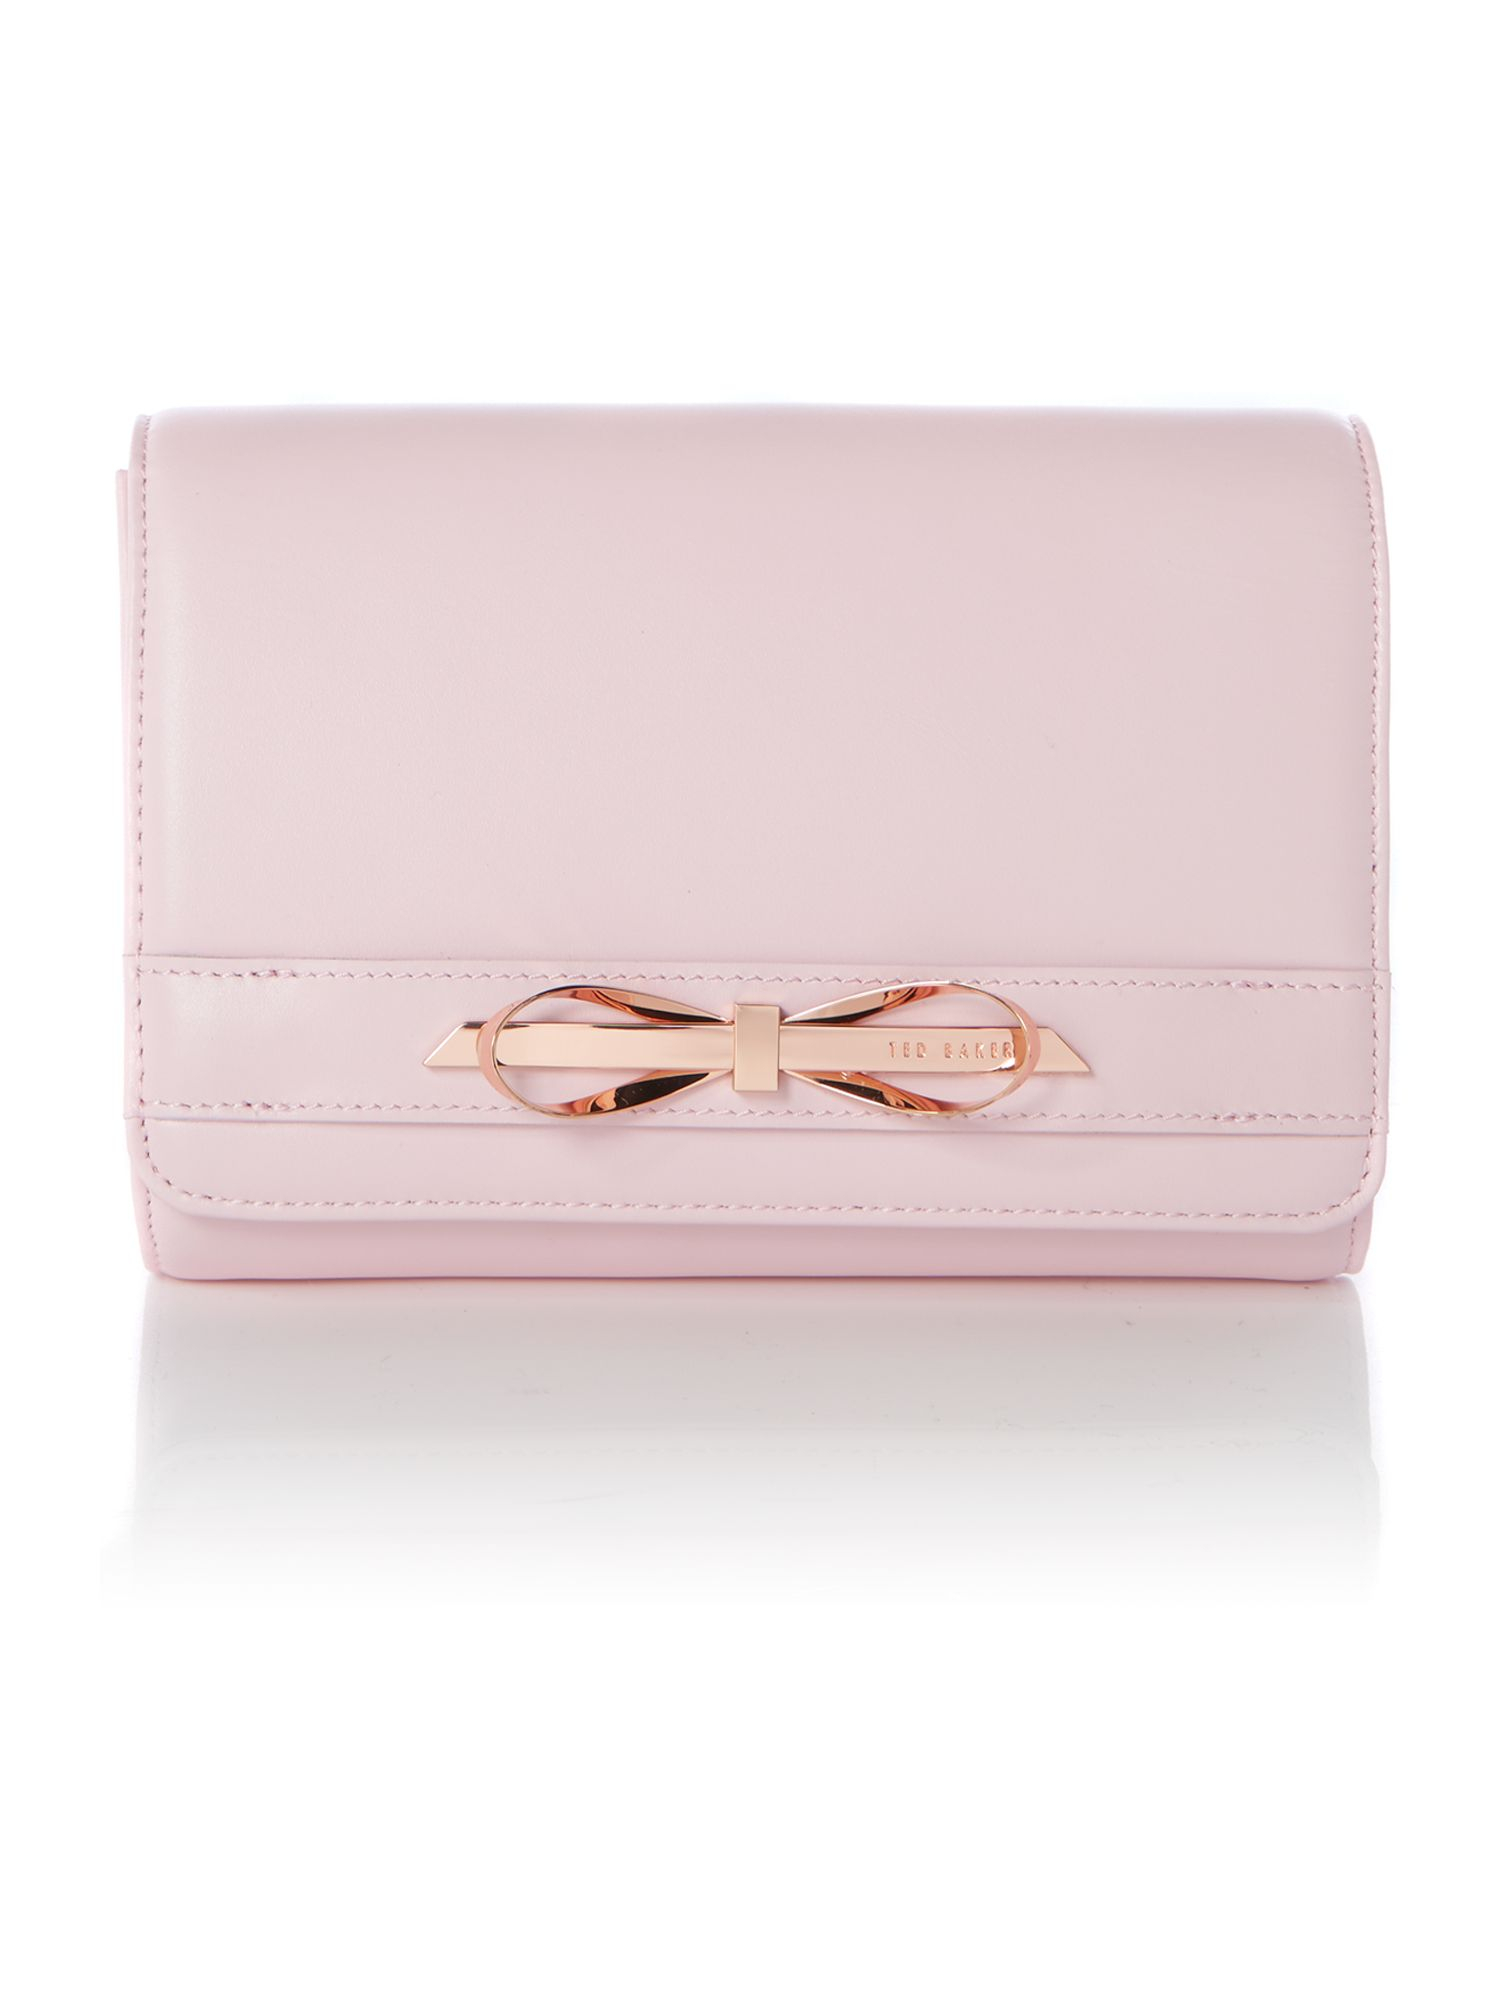 Ted baker Pale Pink Large Bow Leather Cross Body Bag in Pink (Pale%20Pink) | Lyst